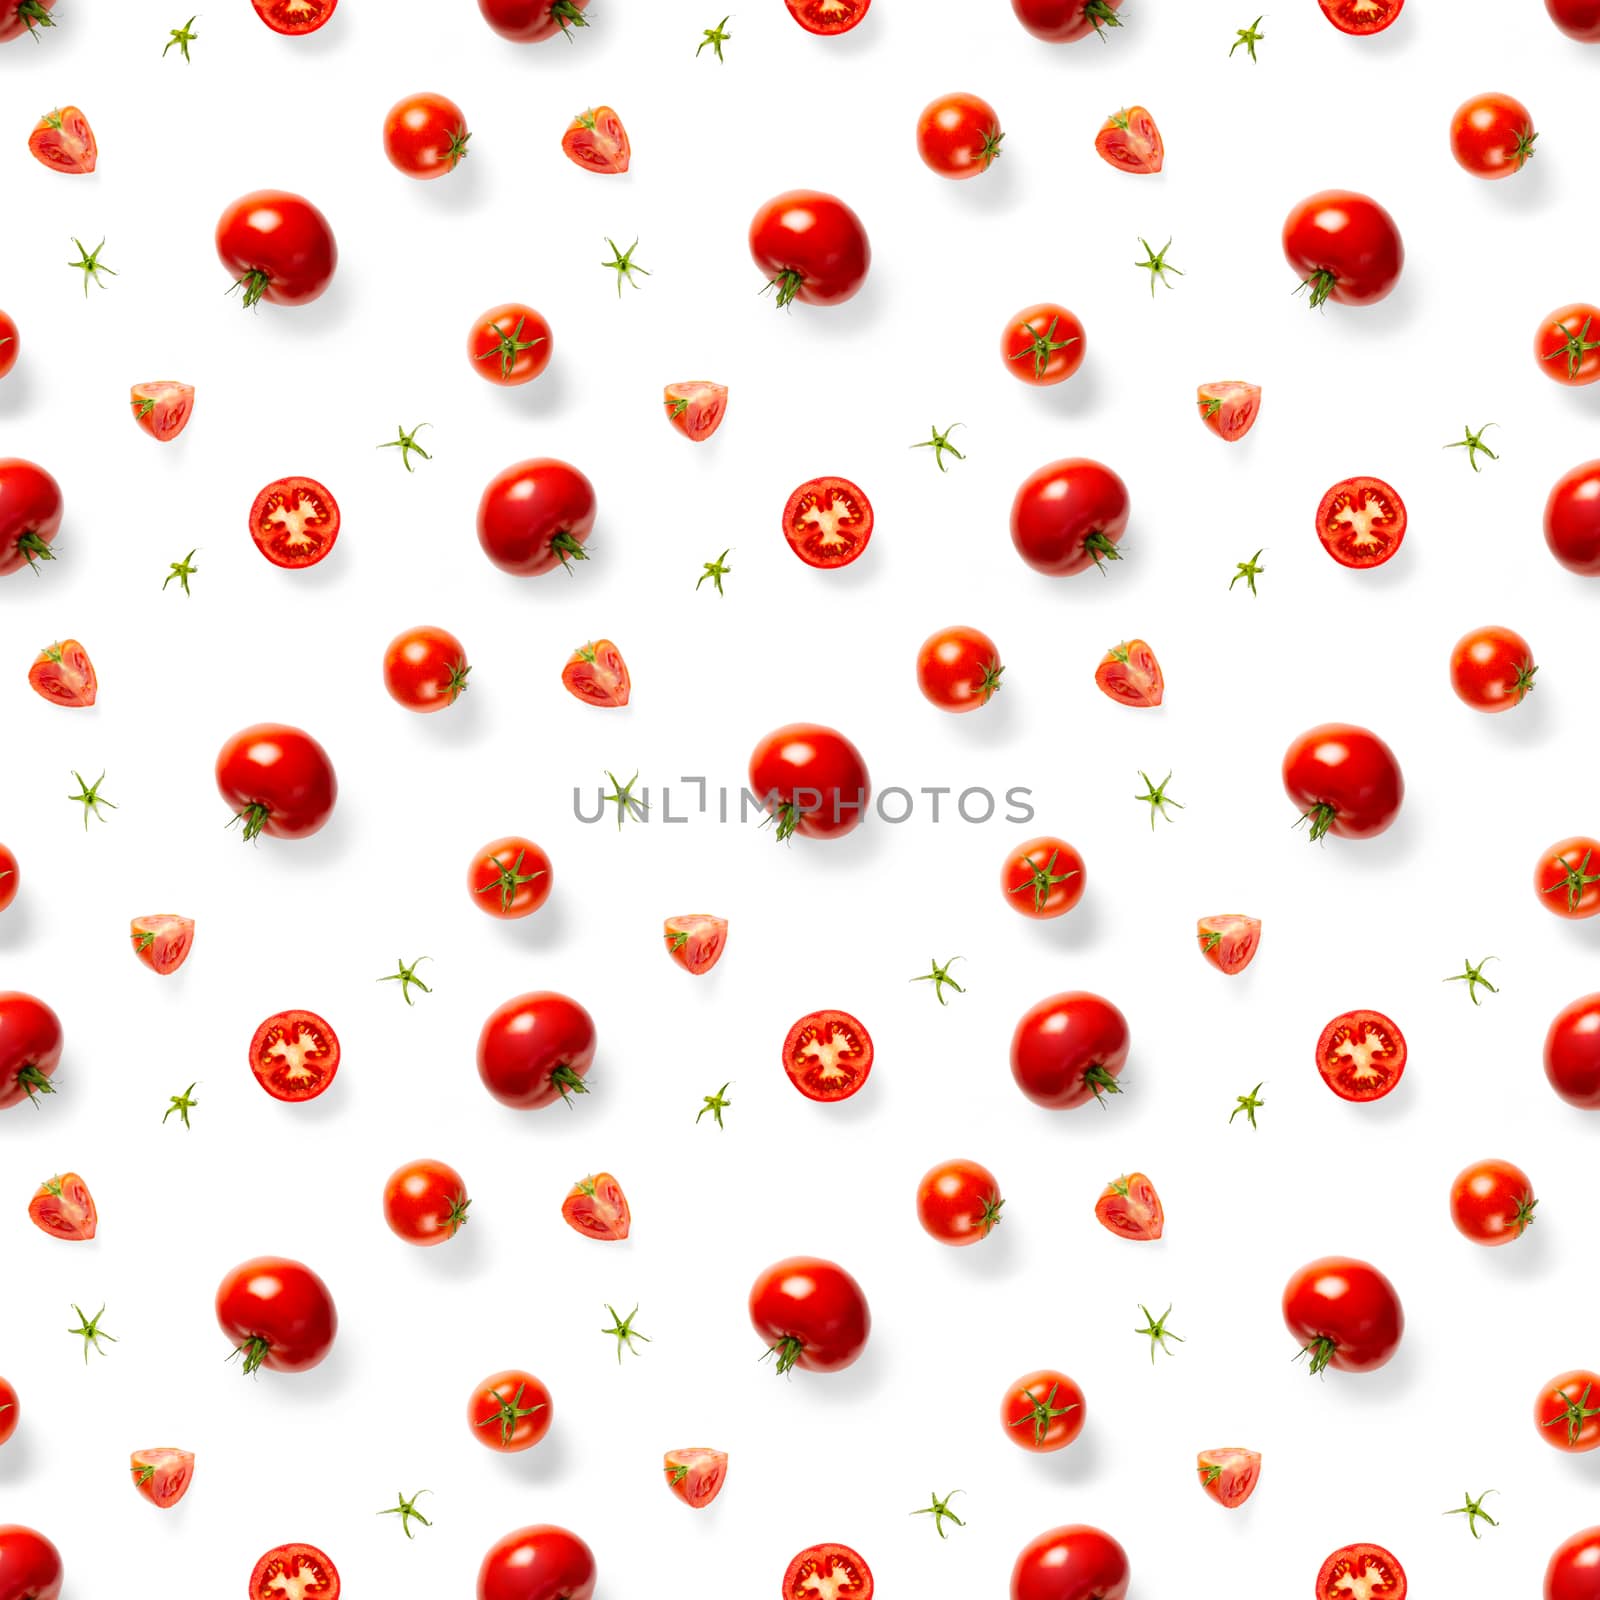 Seamless pattern with red ripe tomatoes. Tomato isolated on white background. Vegetable abstract seamless pattern. Organic Tomatoes flat lay by PhotoTime